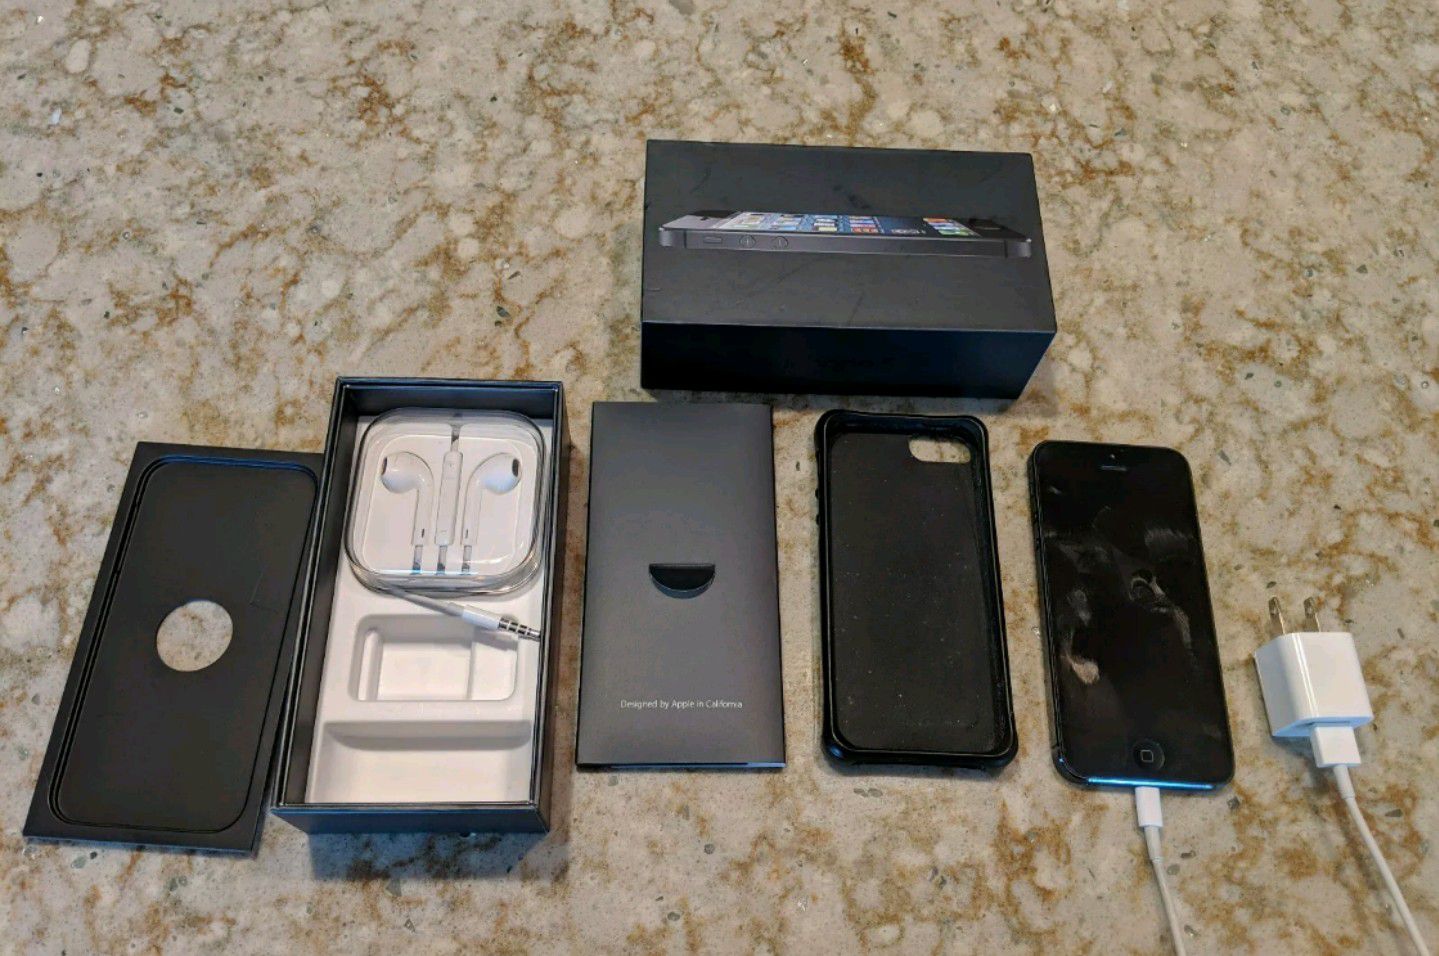 r Unlocked iPhone 5 black 16GB works on metro PCS T-Mobile AT&t Verizon cricket wireless any SIM card ready to activate lo puedo entregar I DELIVER